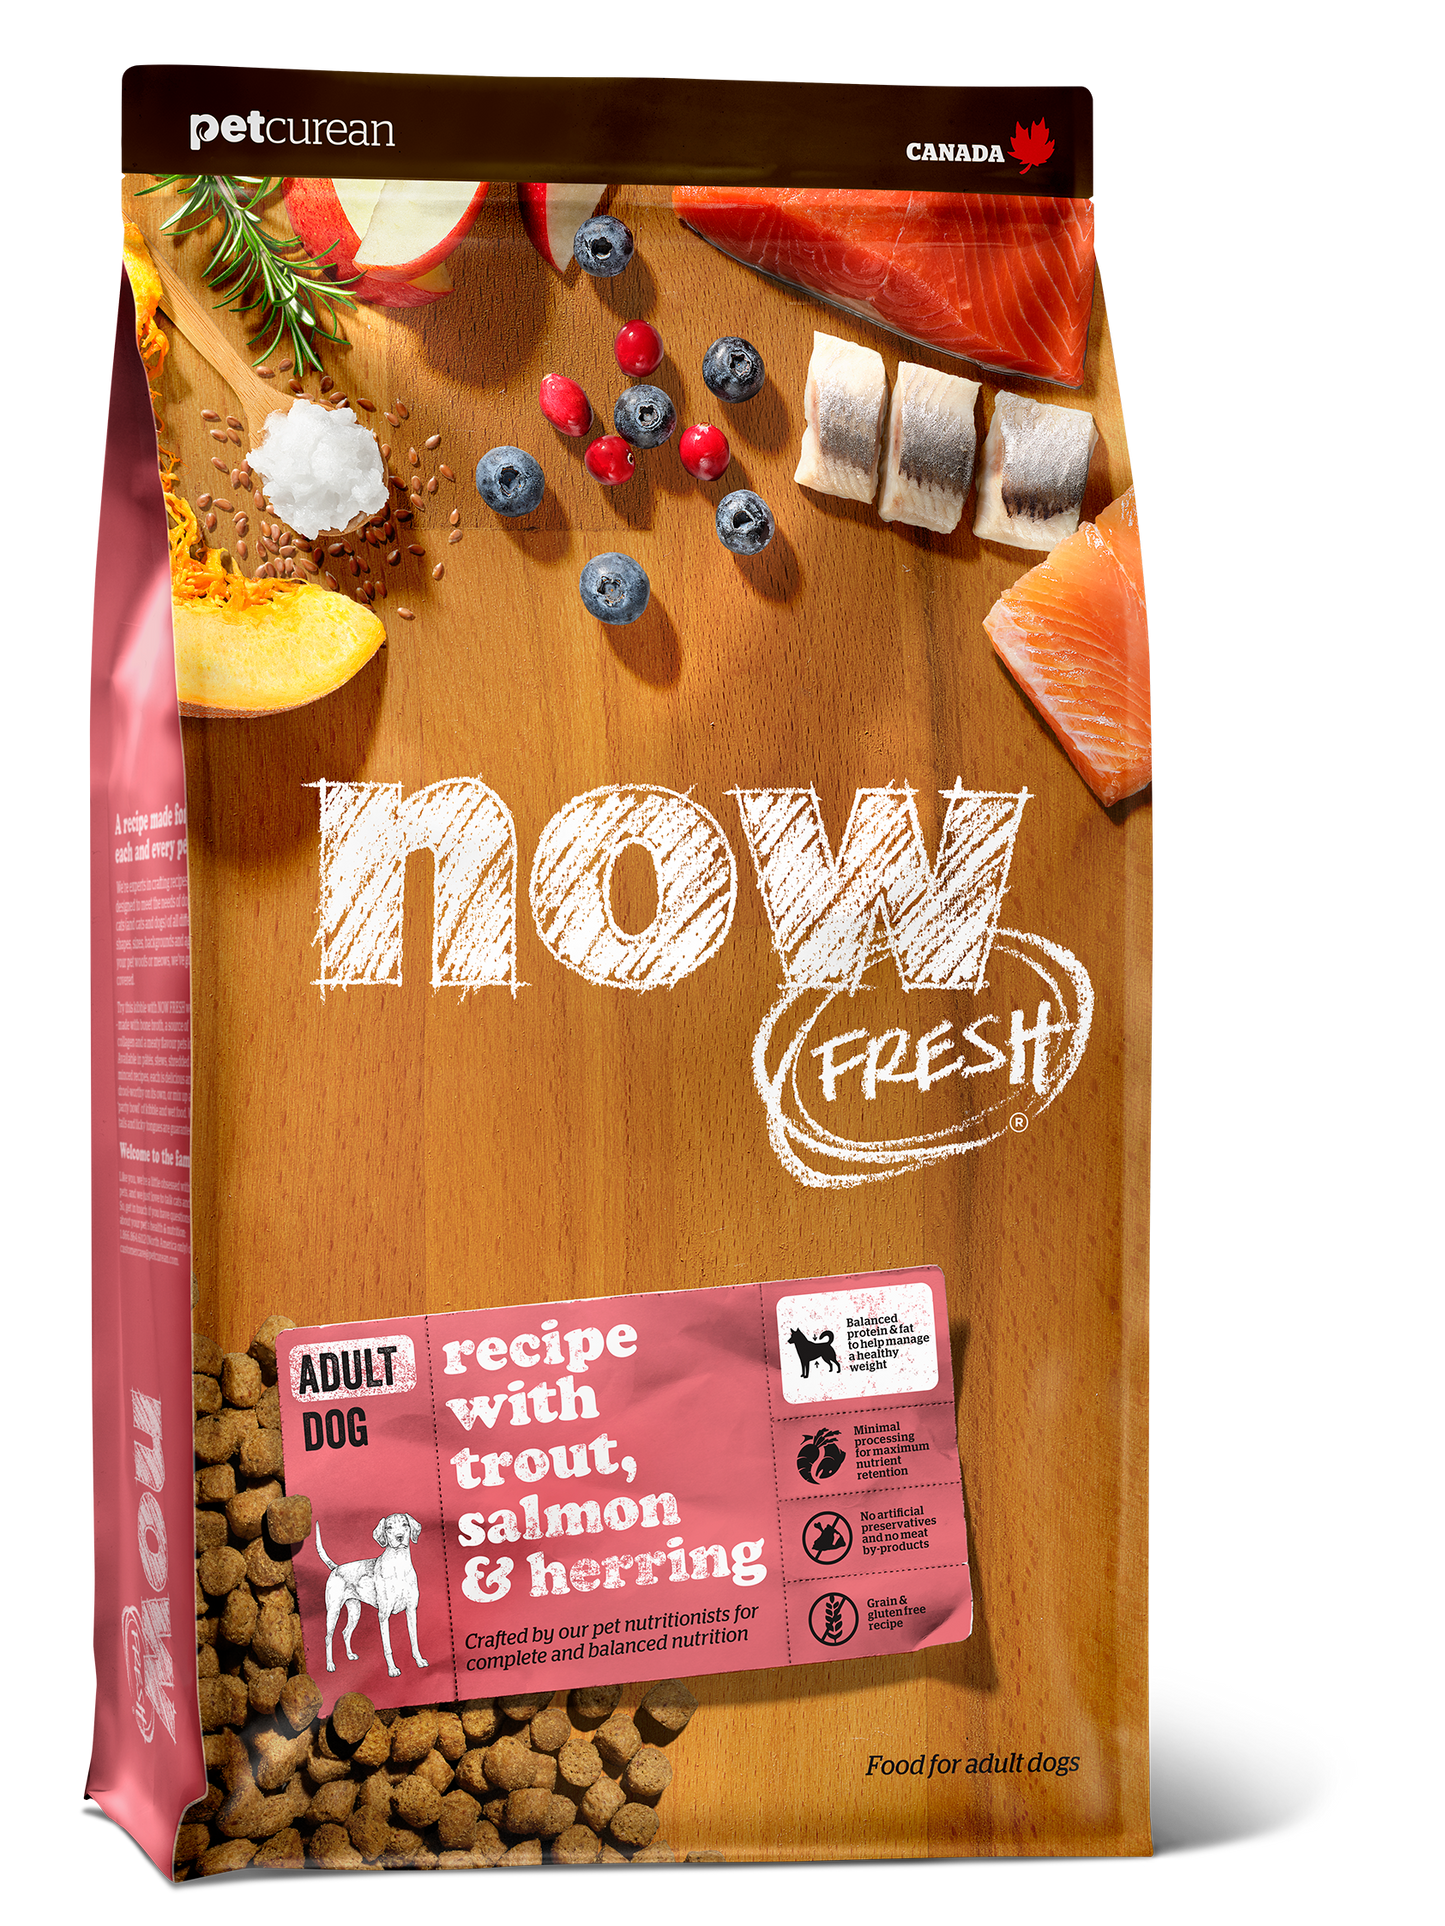 SALE - NOW! FRESH Grain Free Fish Recipe for Adult Dogs